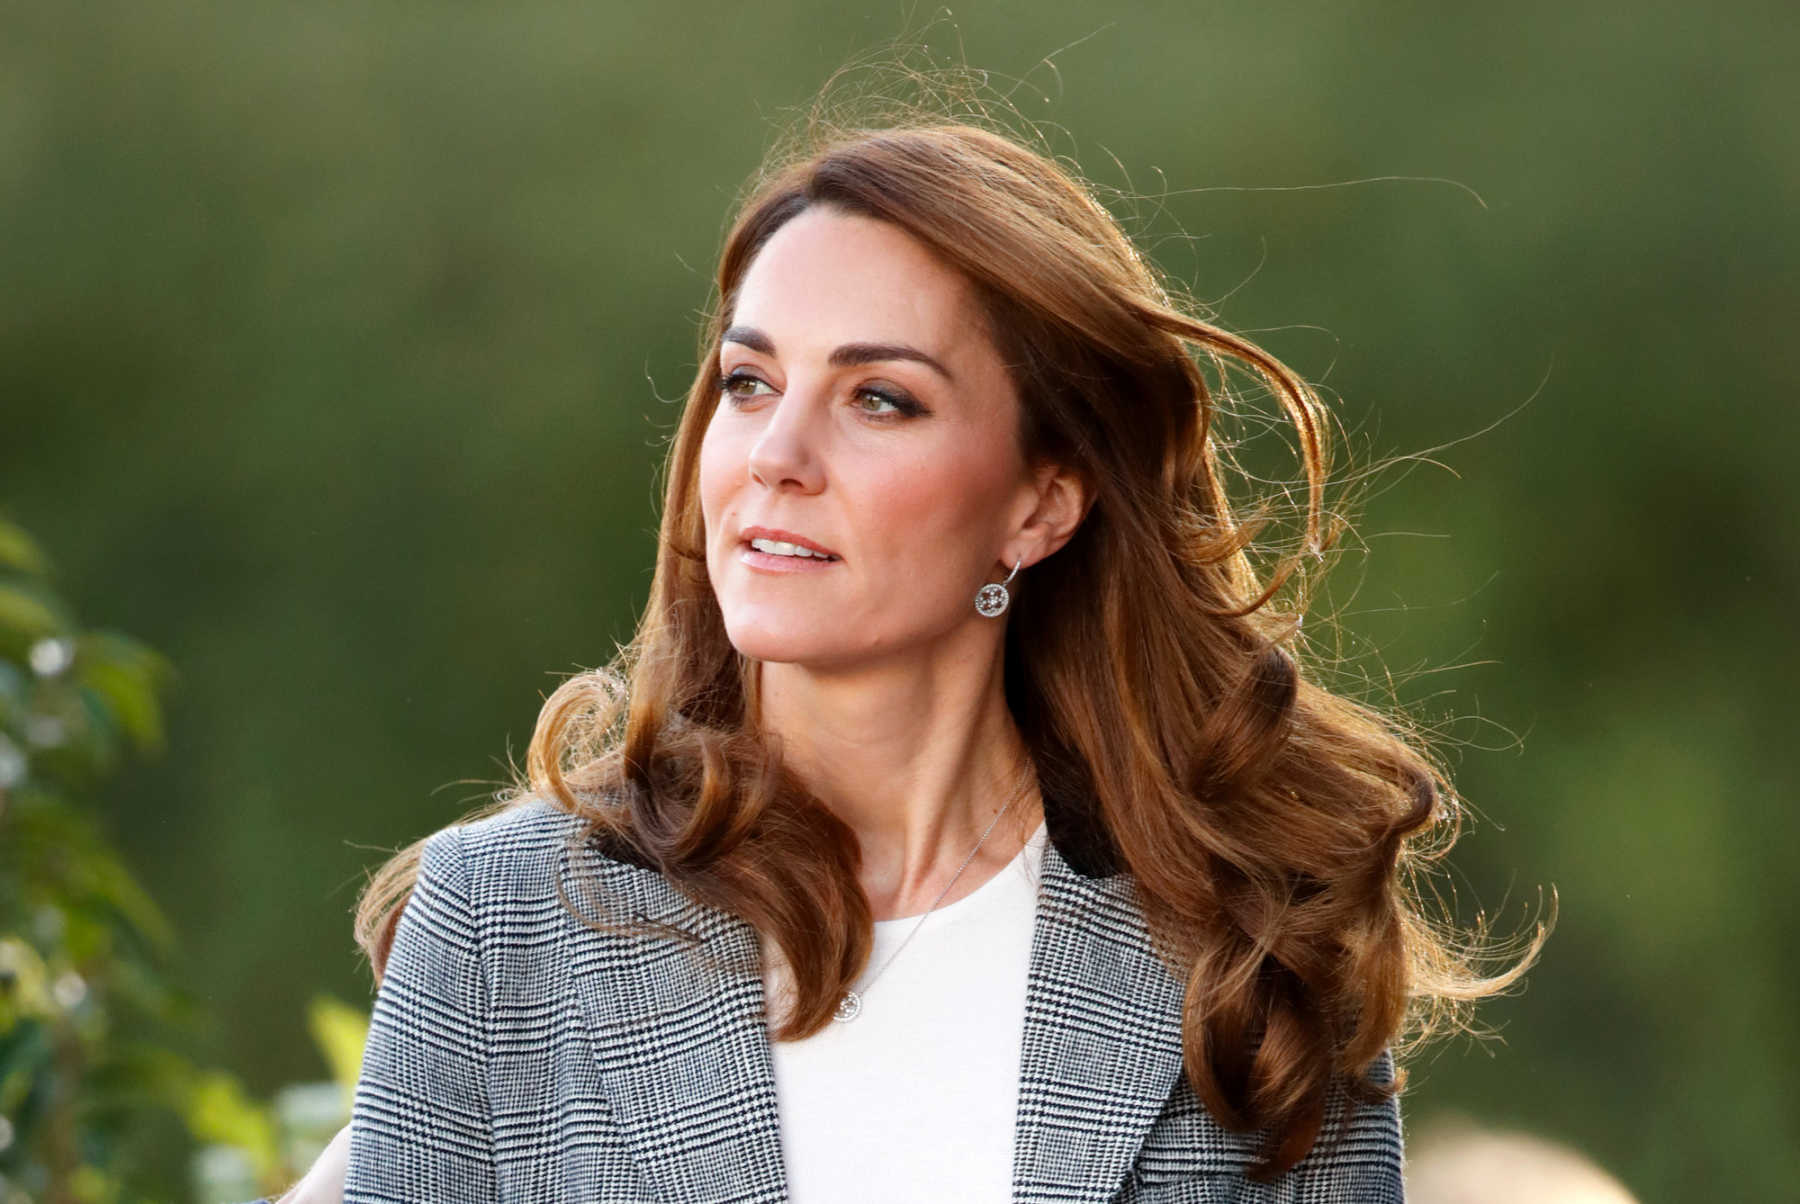 6 Turtleneck Dress Lookalikes for Kate Middleton's Fall Outfit